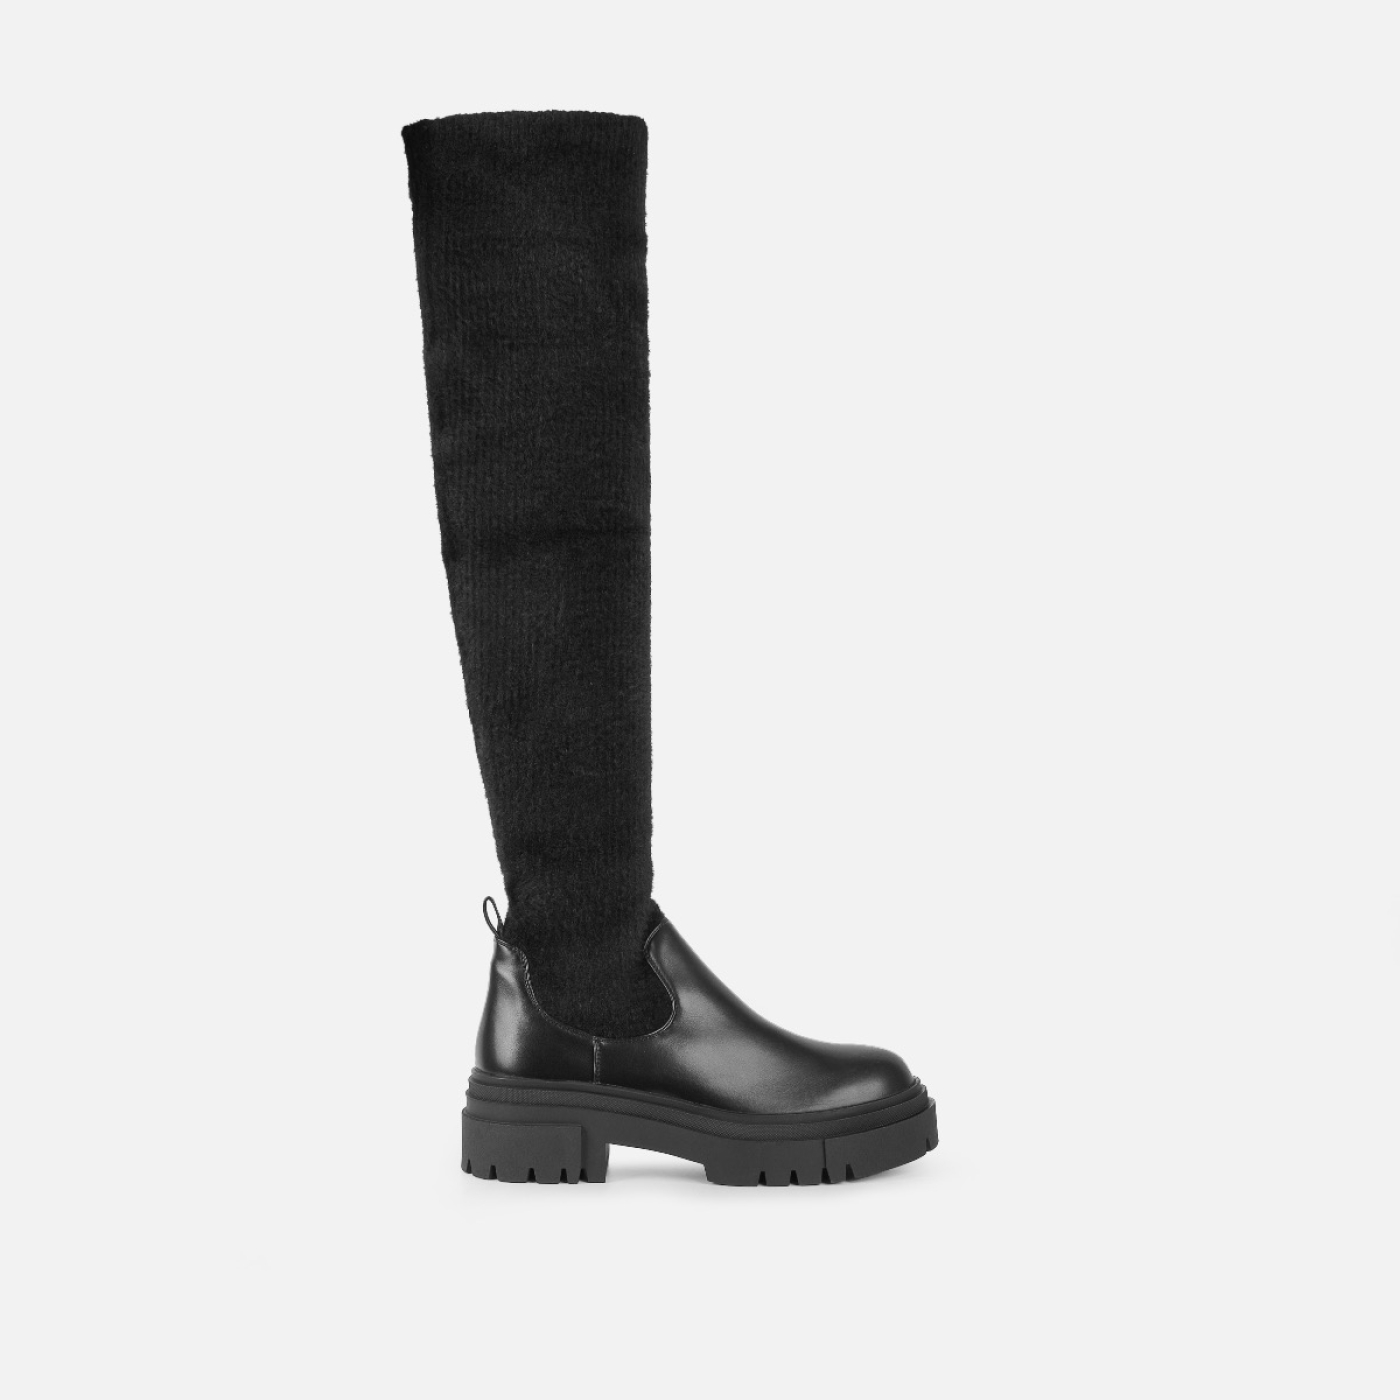 Stallone Black Over The Knee Fluffy Sock Boots | SIMMI London